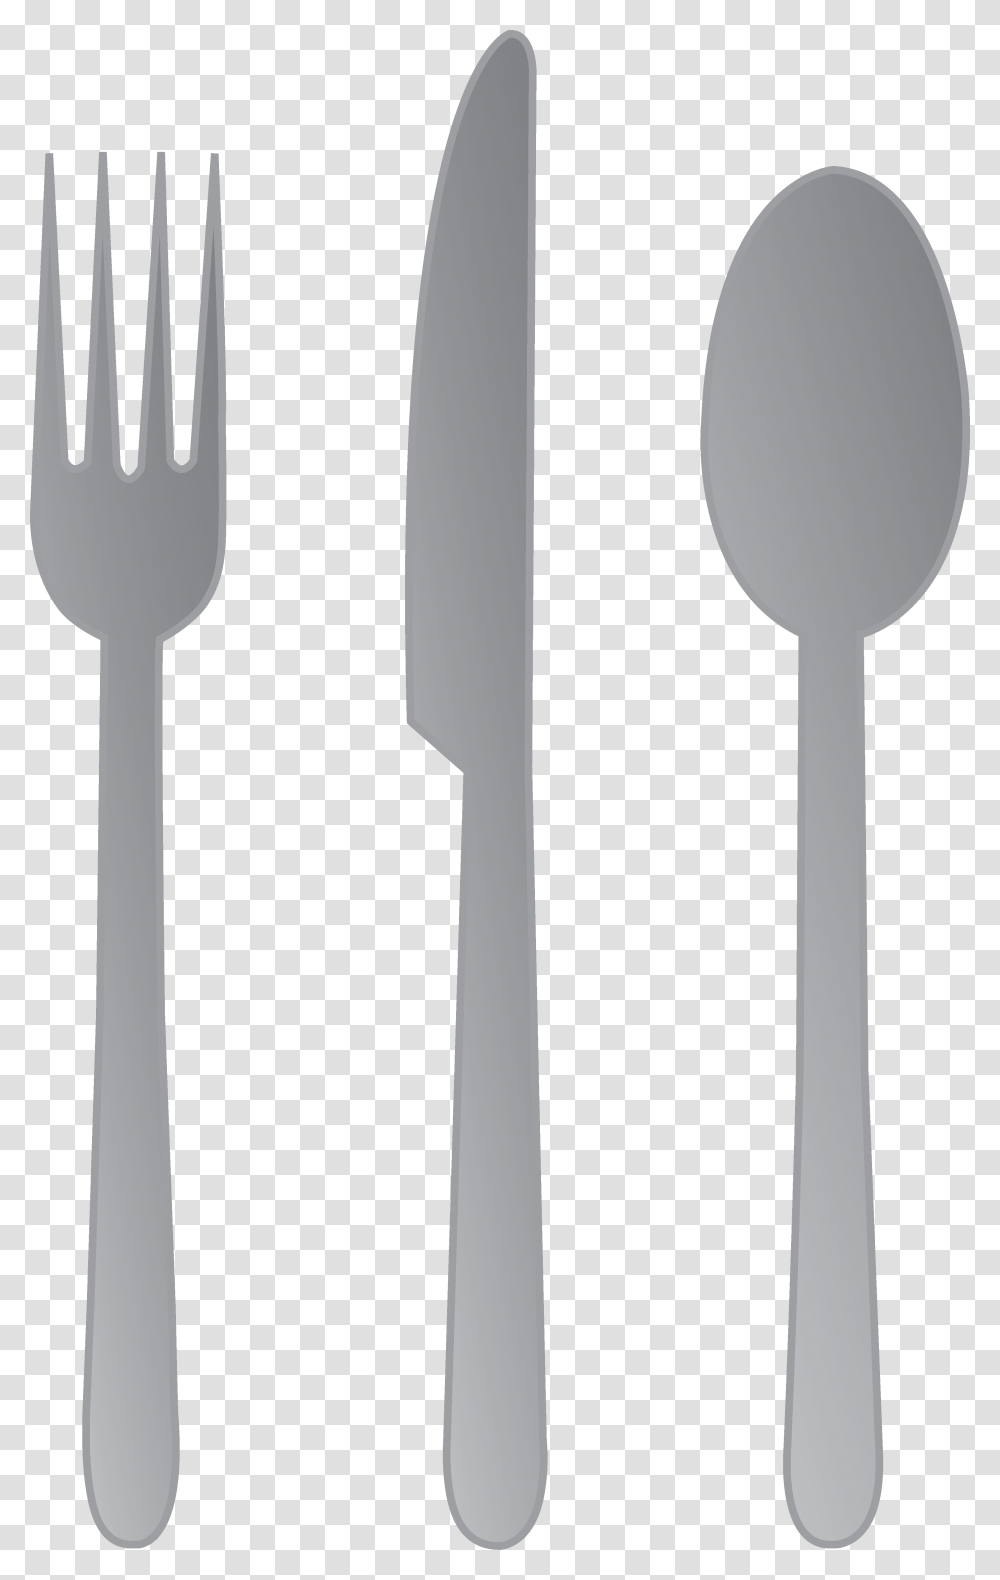 Library Of Spoon Fork Knife Jpg Free Downloads Clip Art Spoon And Fork, Cutlery Transparent Png